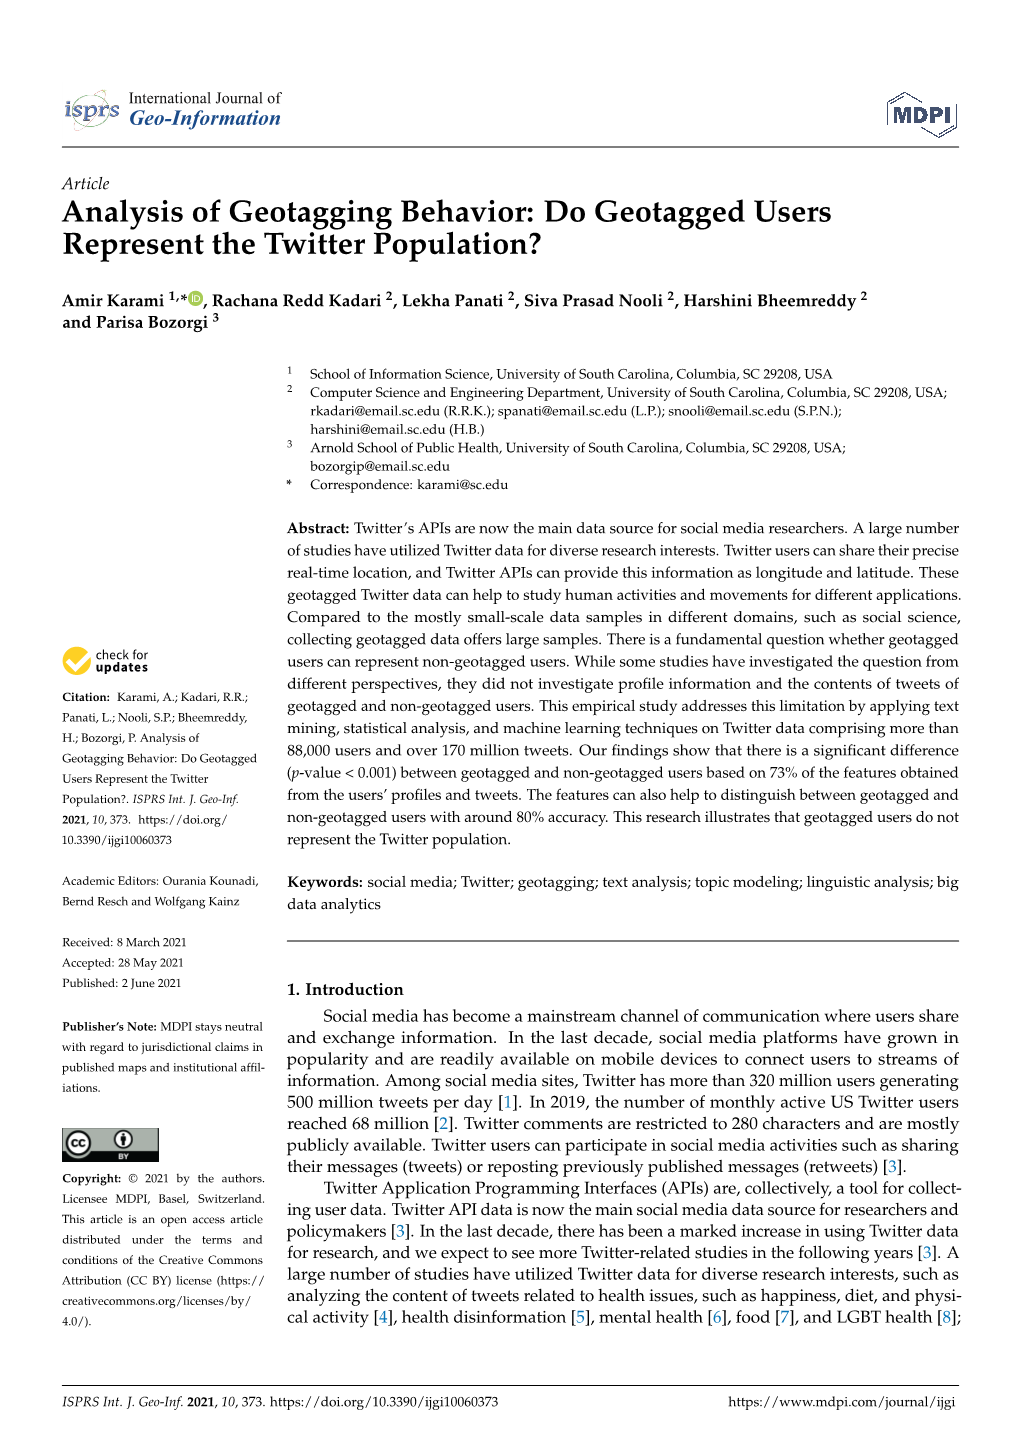 Analysis of Geotagging Behavior: Do Geotagged Users Represent the Twitter Population?